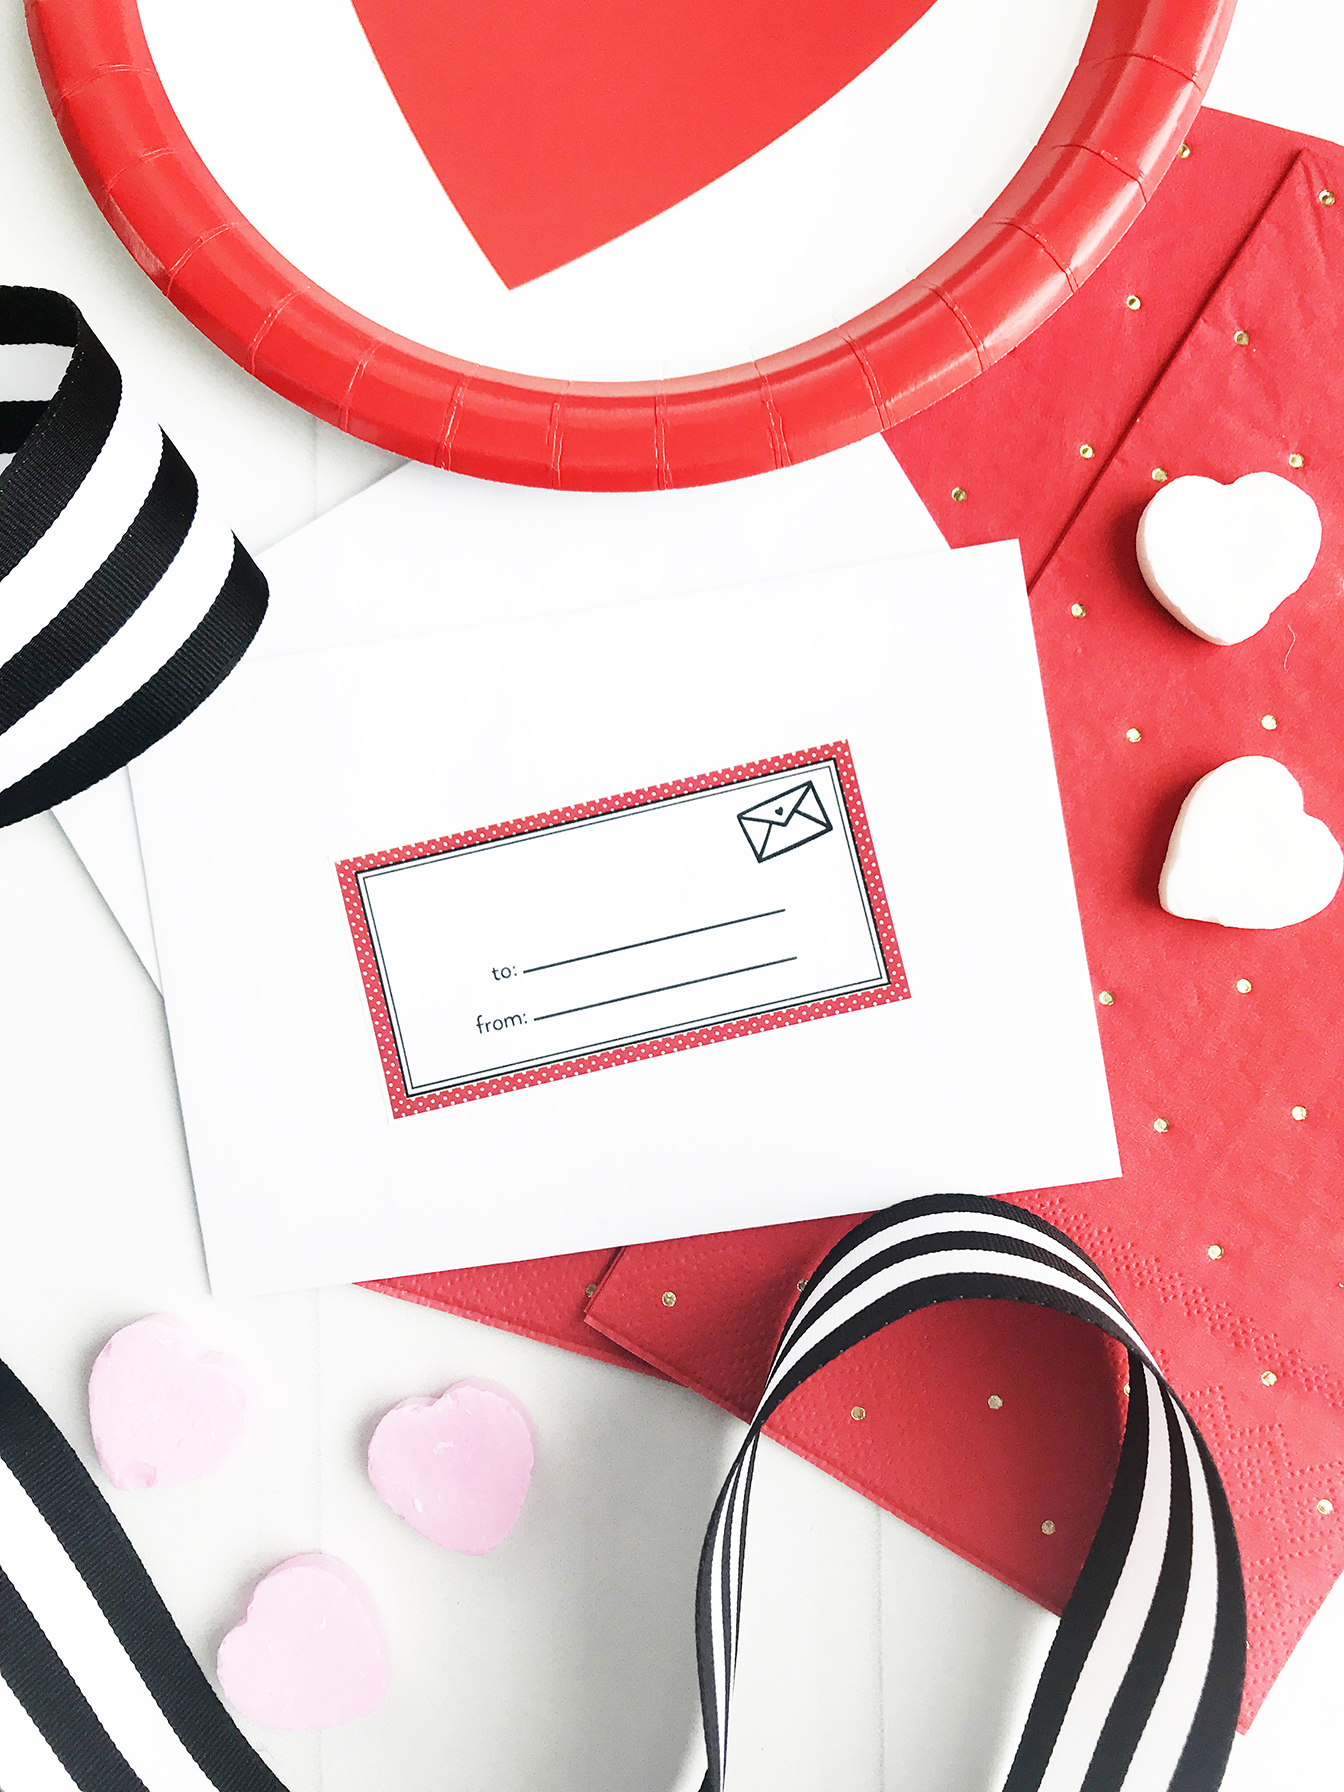 Make Easy Valentine Cards with FREE Printable Tags